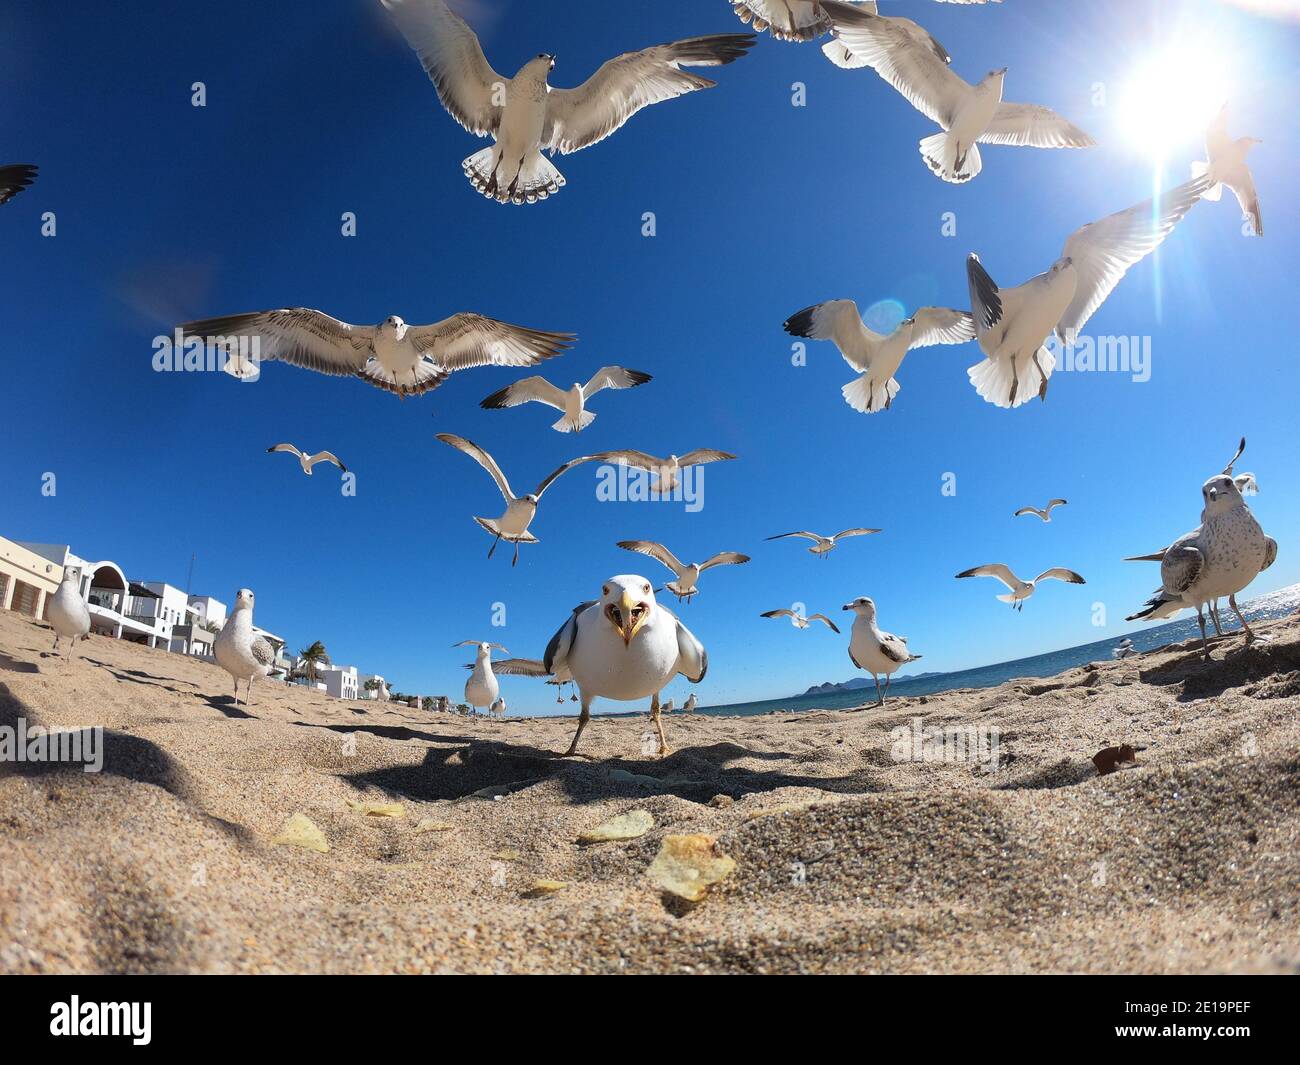 Seagulls flying and feeding on the sand on the shore of Bahia de Kino beach, a tourist destination in the Gulf of California or Sea of Cortez in the state of Sonora, Mexico. Gulls Birds, Seagulls, Sea Gulls, Red Sea, northwest, nature photography, birds, birds.   (Photo by Luis Gutierrez / Norte Photo)  Gaviotas volando y alimentadose sobre la arena a la orilla de la playa  Bahia de Kino, destino turistico del Golfo de California o Mar de Cortez en el estado de Sonora, Mexico. Gulls Birds, Seagulls , Sea Gulls, mar Bermejo, northwest, fotografia de naturaleza, aves, pajaros.  (Photo by Luis Gu Stock Photo